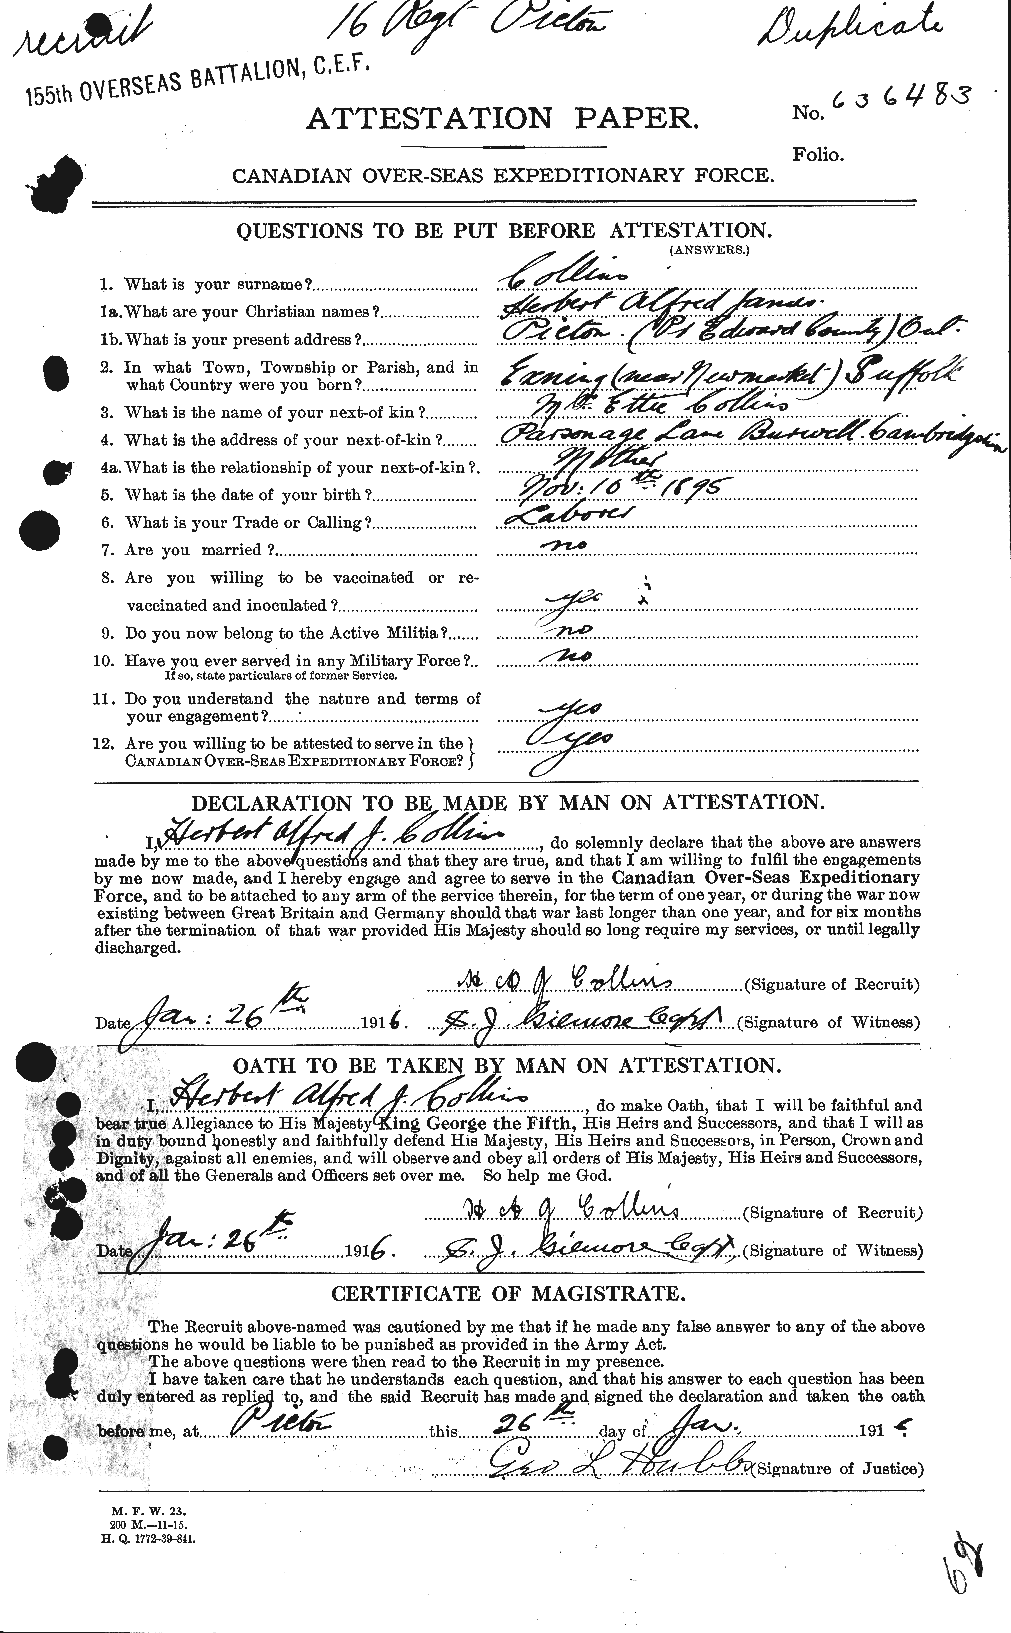 Personnel Records of the First World War - CEF 070003a